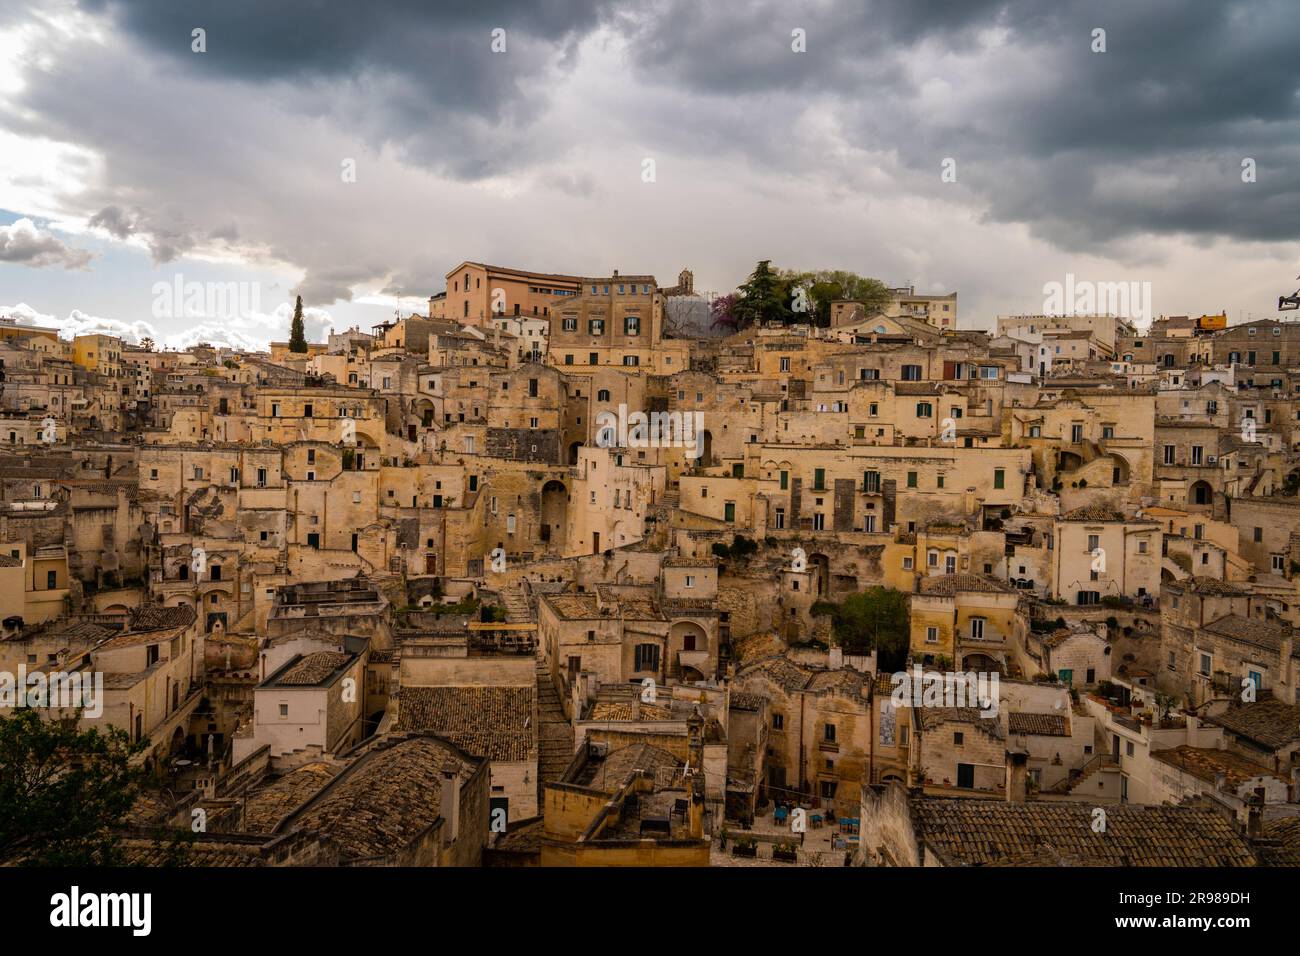 The medieval town of Matera in the Italian region of Basilicata. It is known for the Sassy, caves excavated on the sides of the hill. Stock Photo